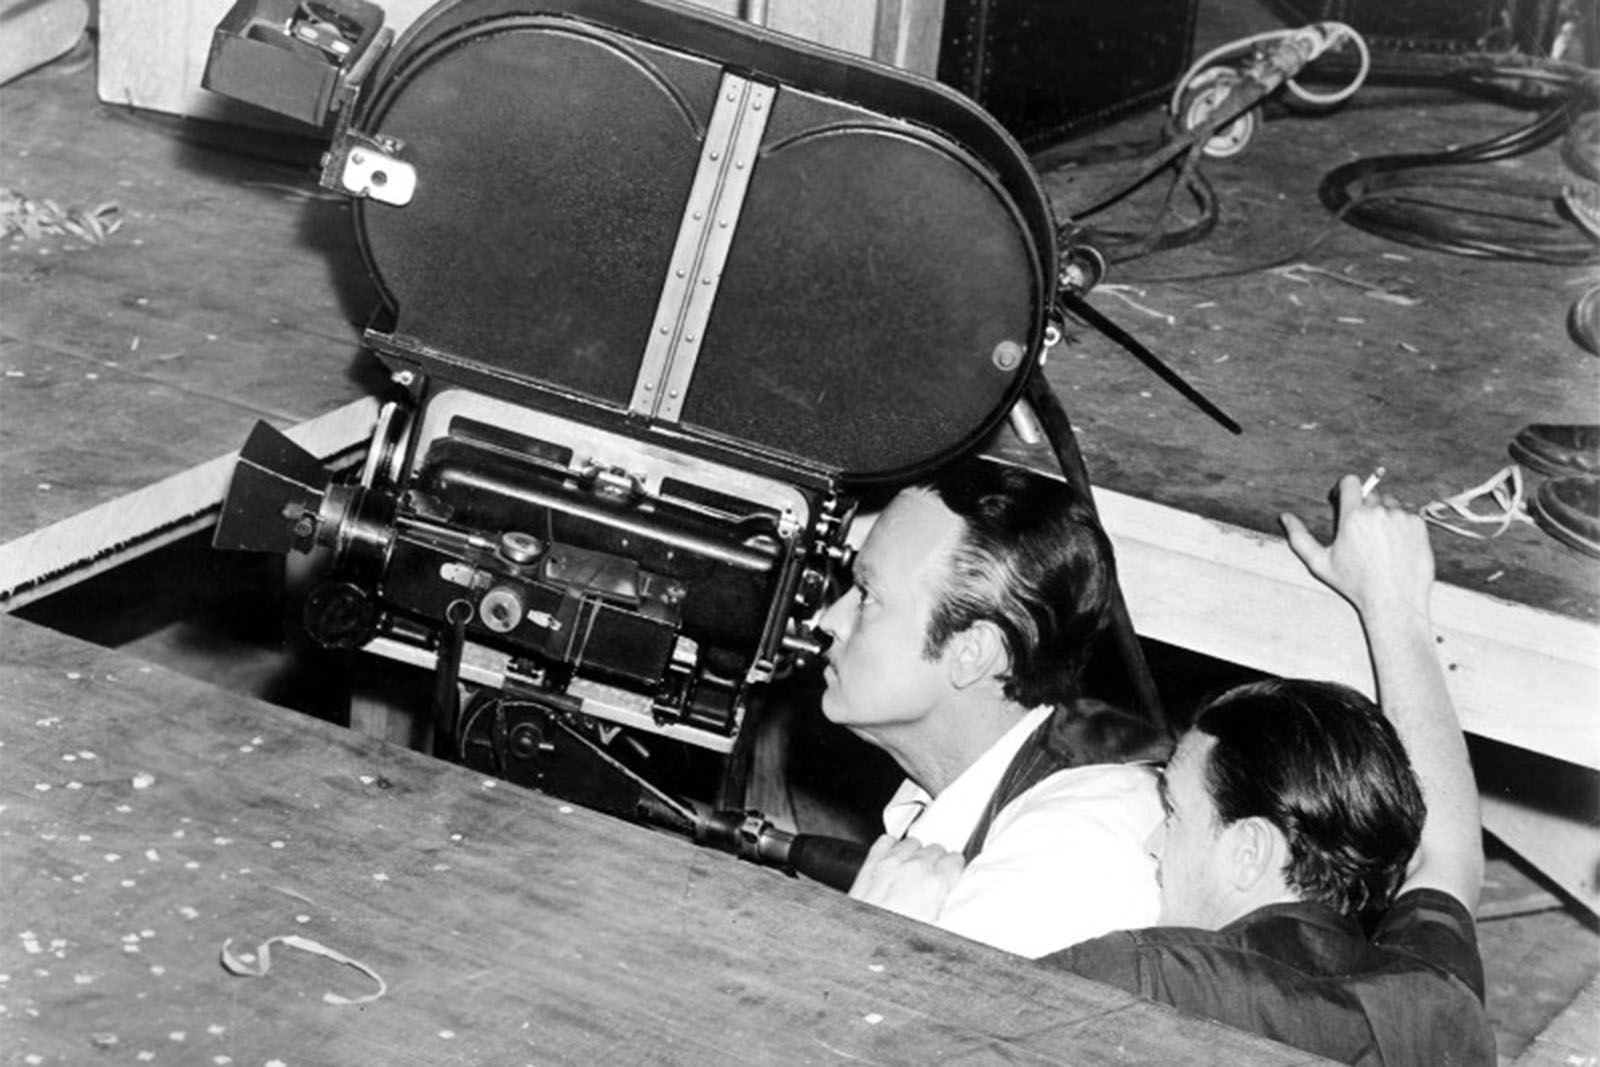 The size of cinema cameras can require extreme measures for certain shots, like this low angle setup for Citizen Kane.